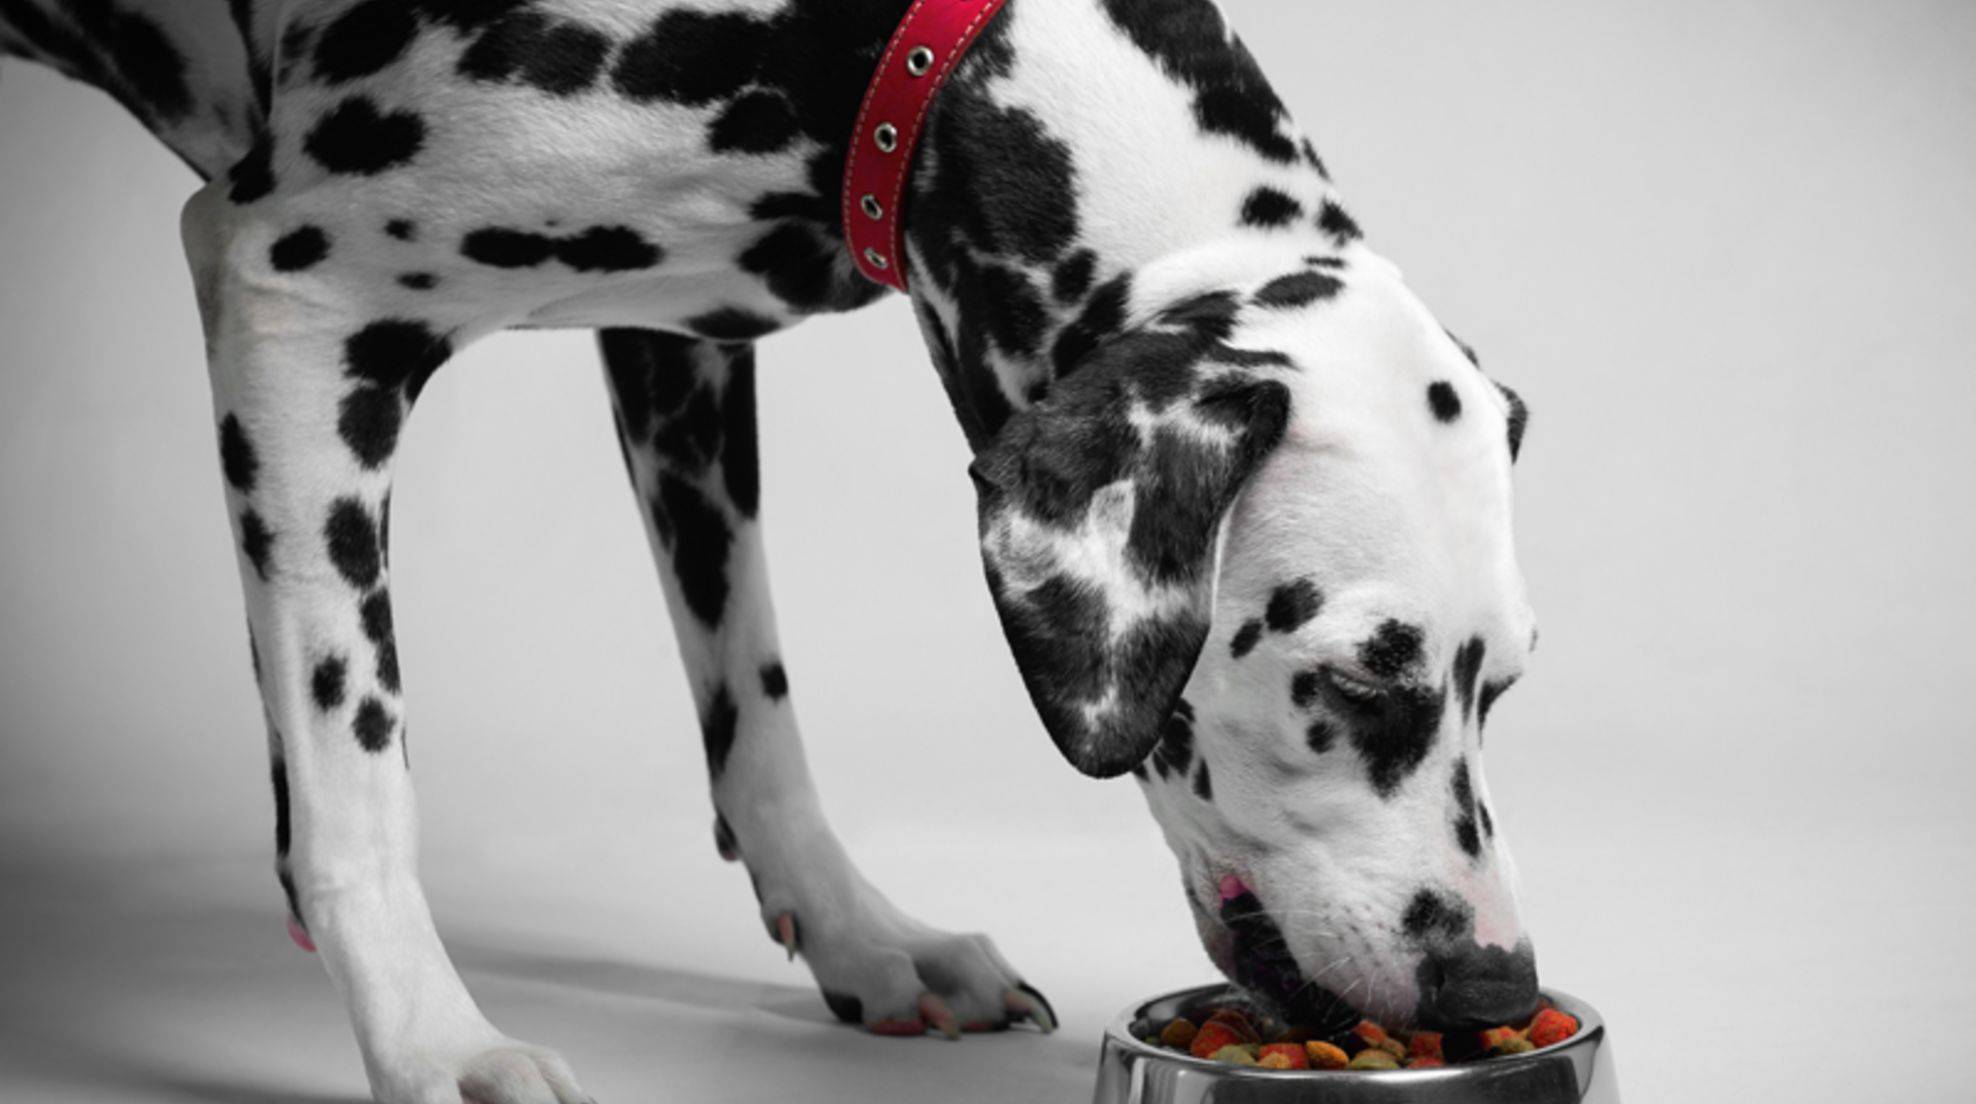 Dry food or wet food for dogs: which is better?